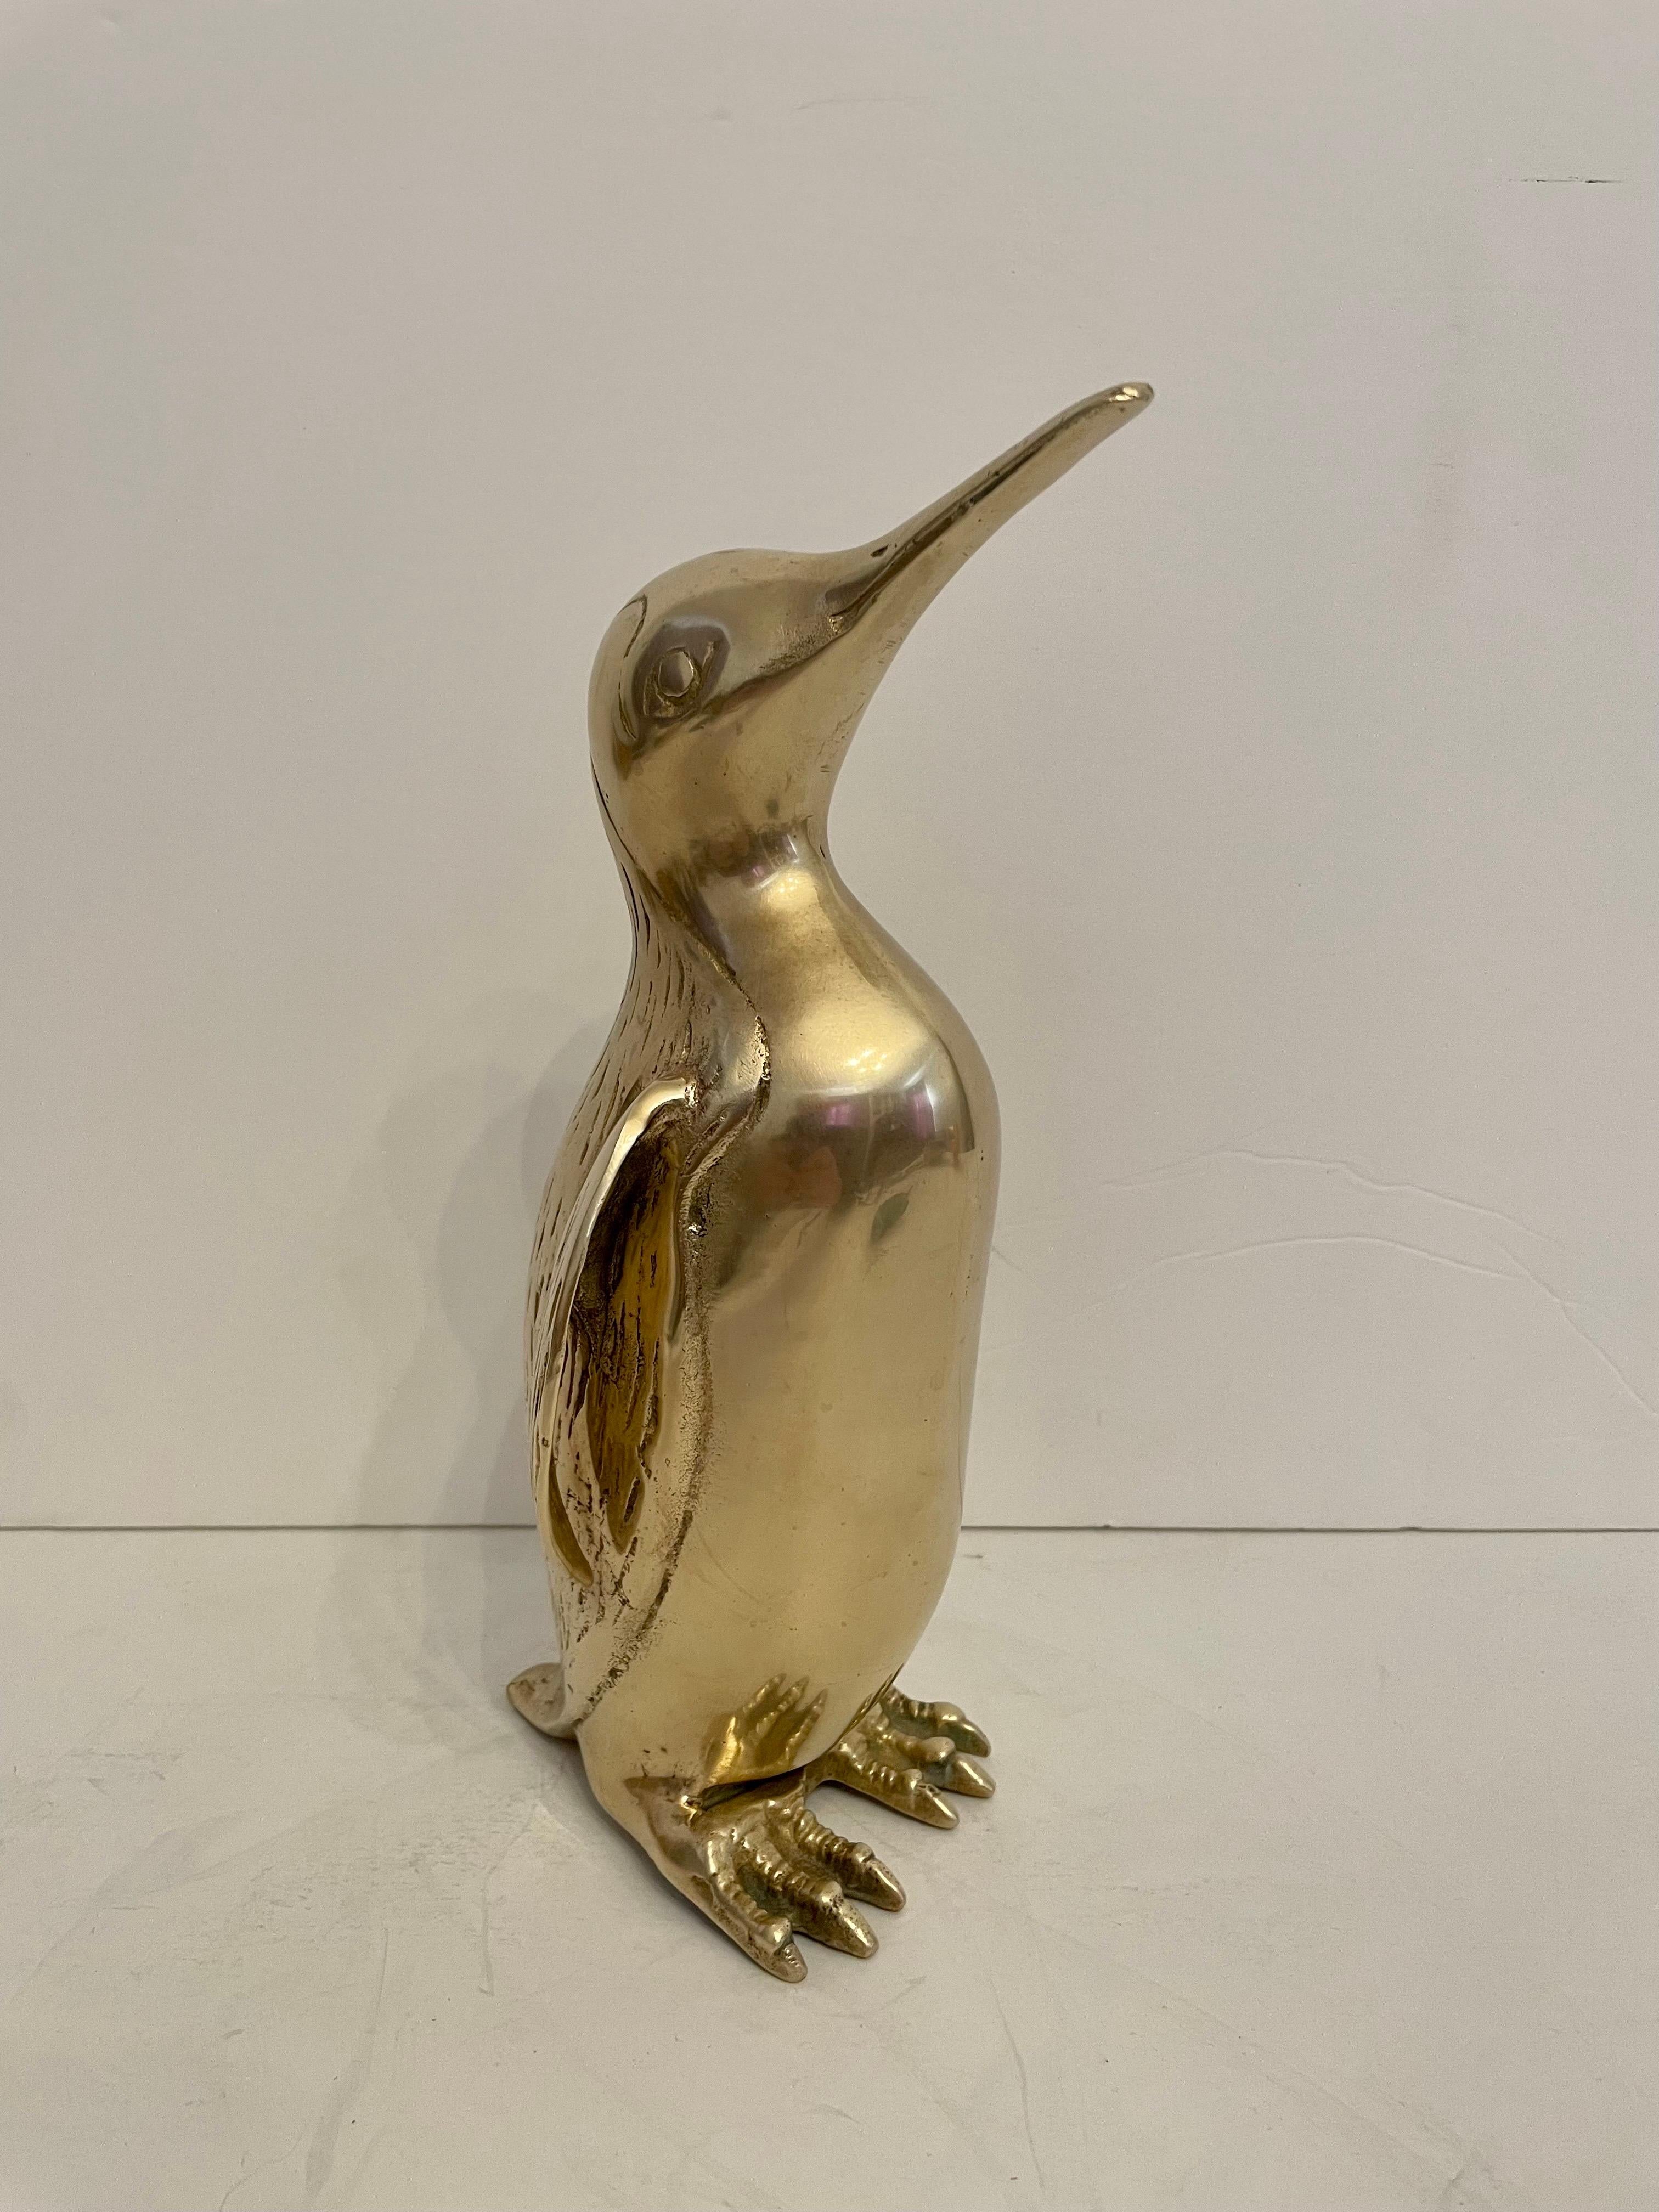  Large Vintage Hollywood Regency brass Penguin sculpture. Nicely detailed. Hand polished. Good overall condition. Dark spots are reflection of light in photos. Measures 10” tall x 5” wide x 5” deep. 